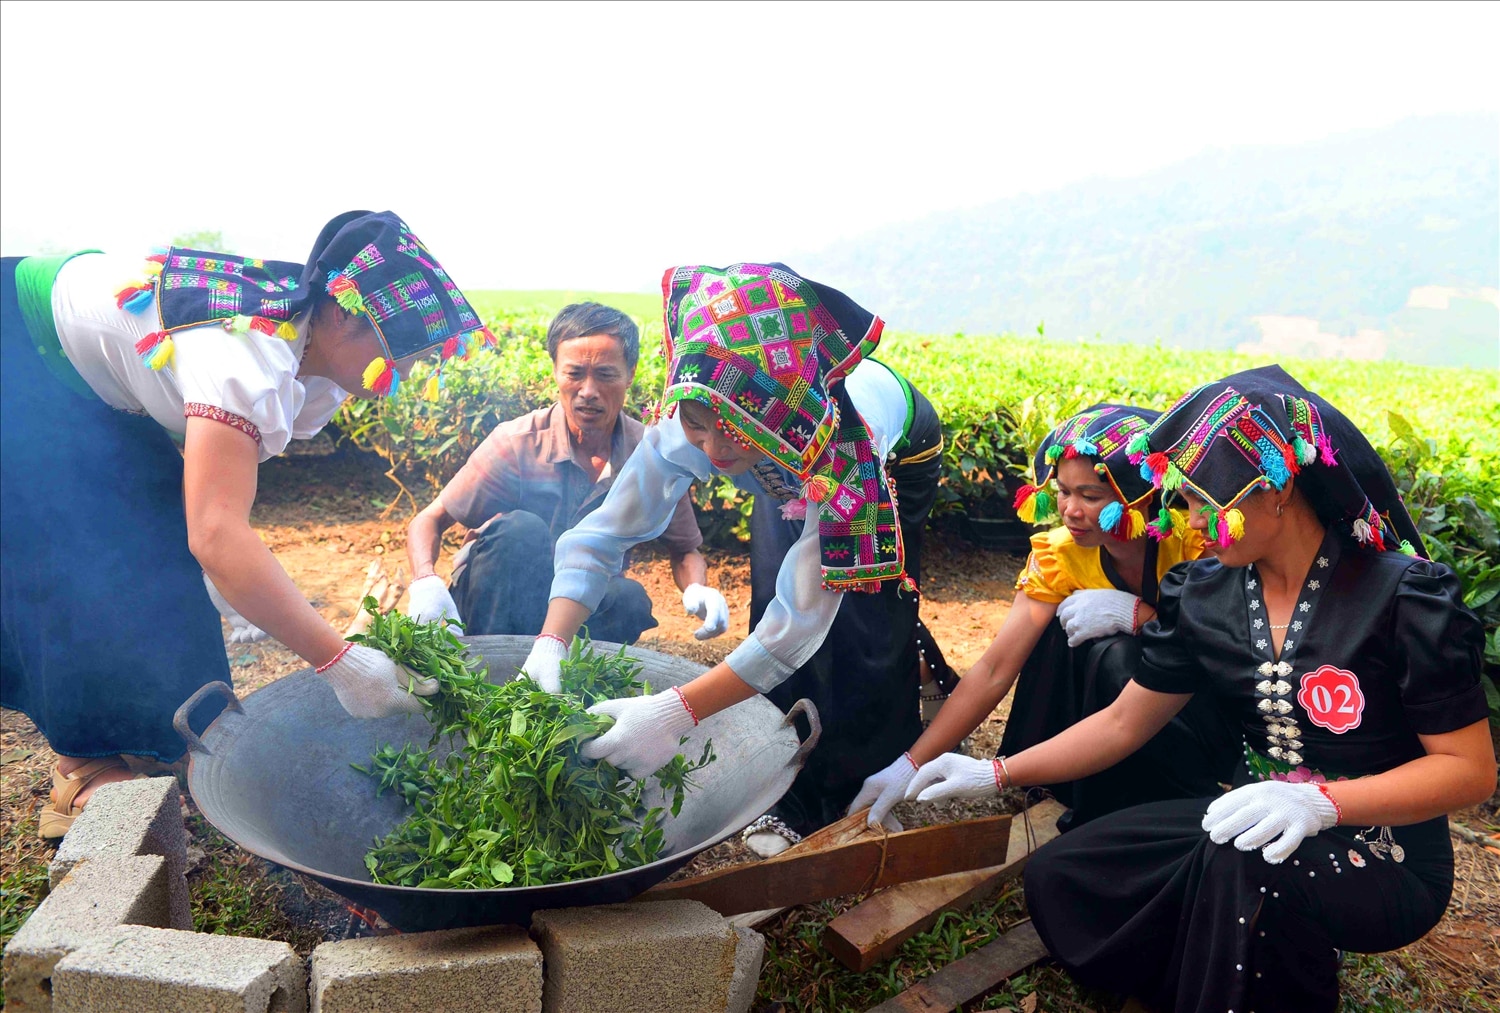 To produce beautiful, twisted tea leaves, the tea rolling process is also quite important.